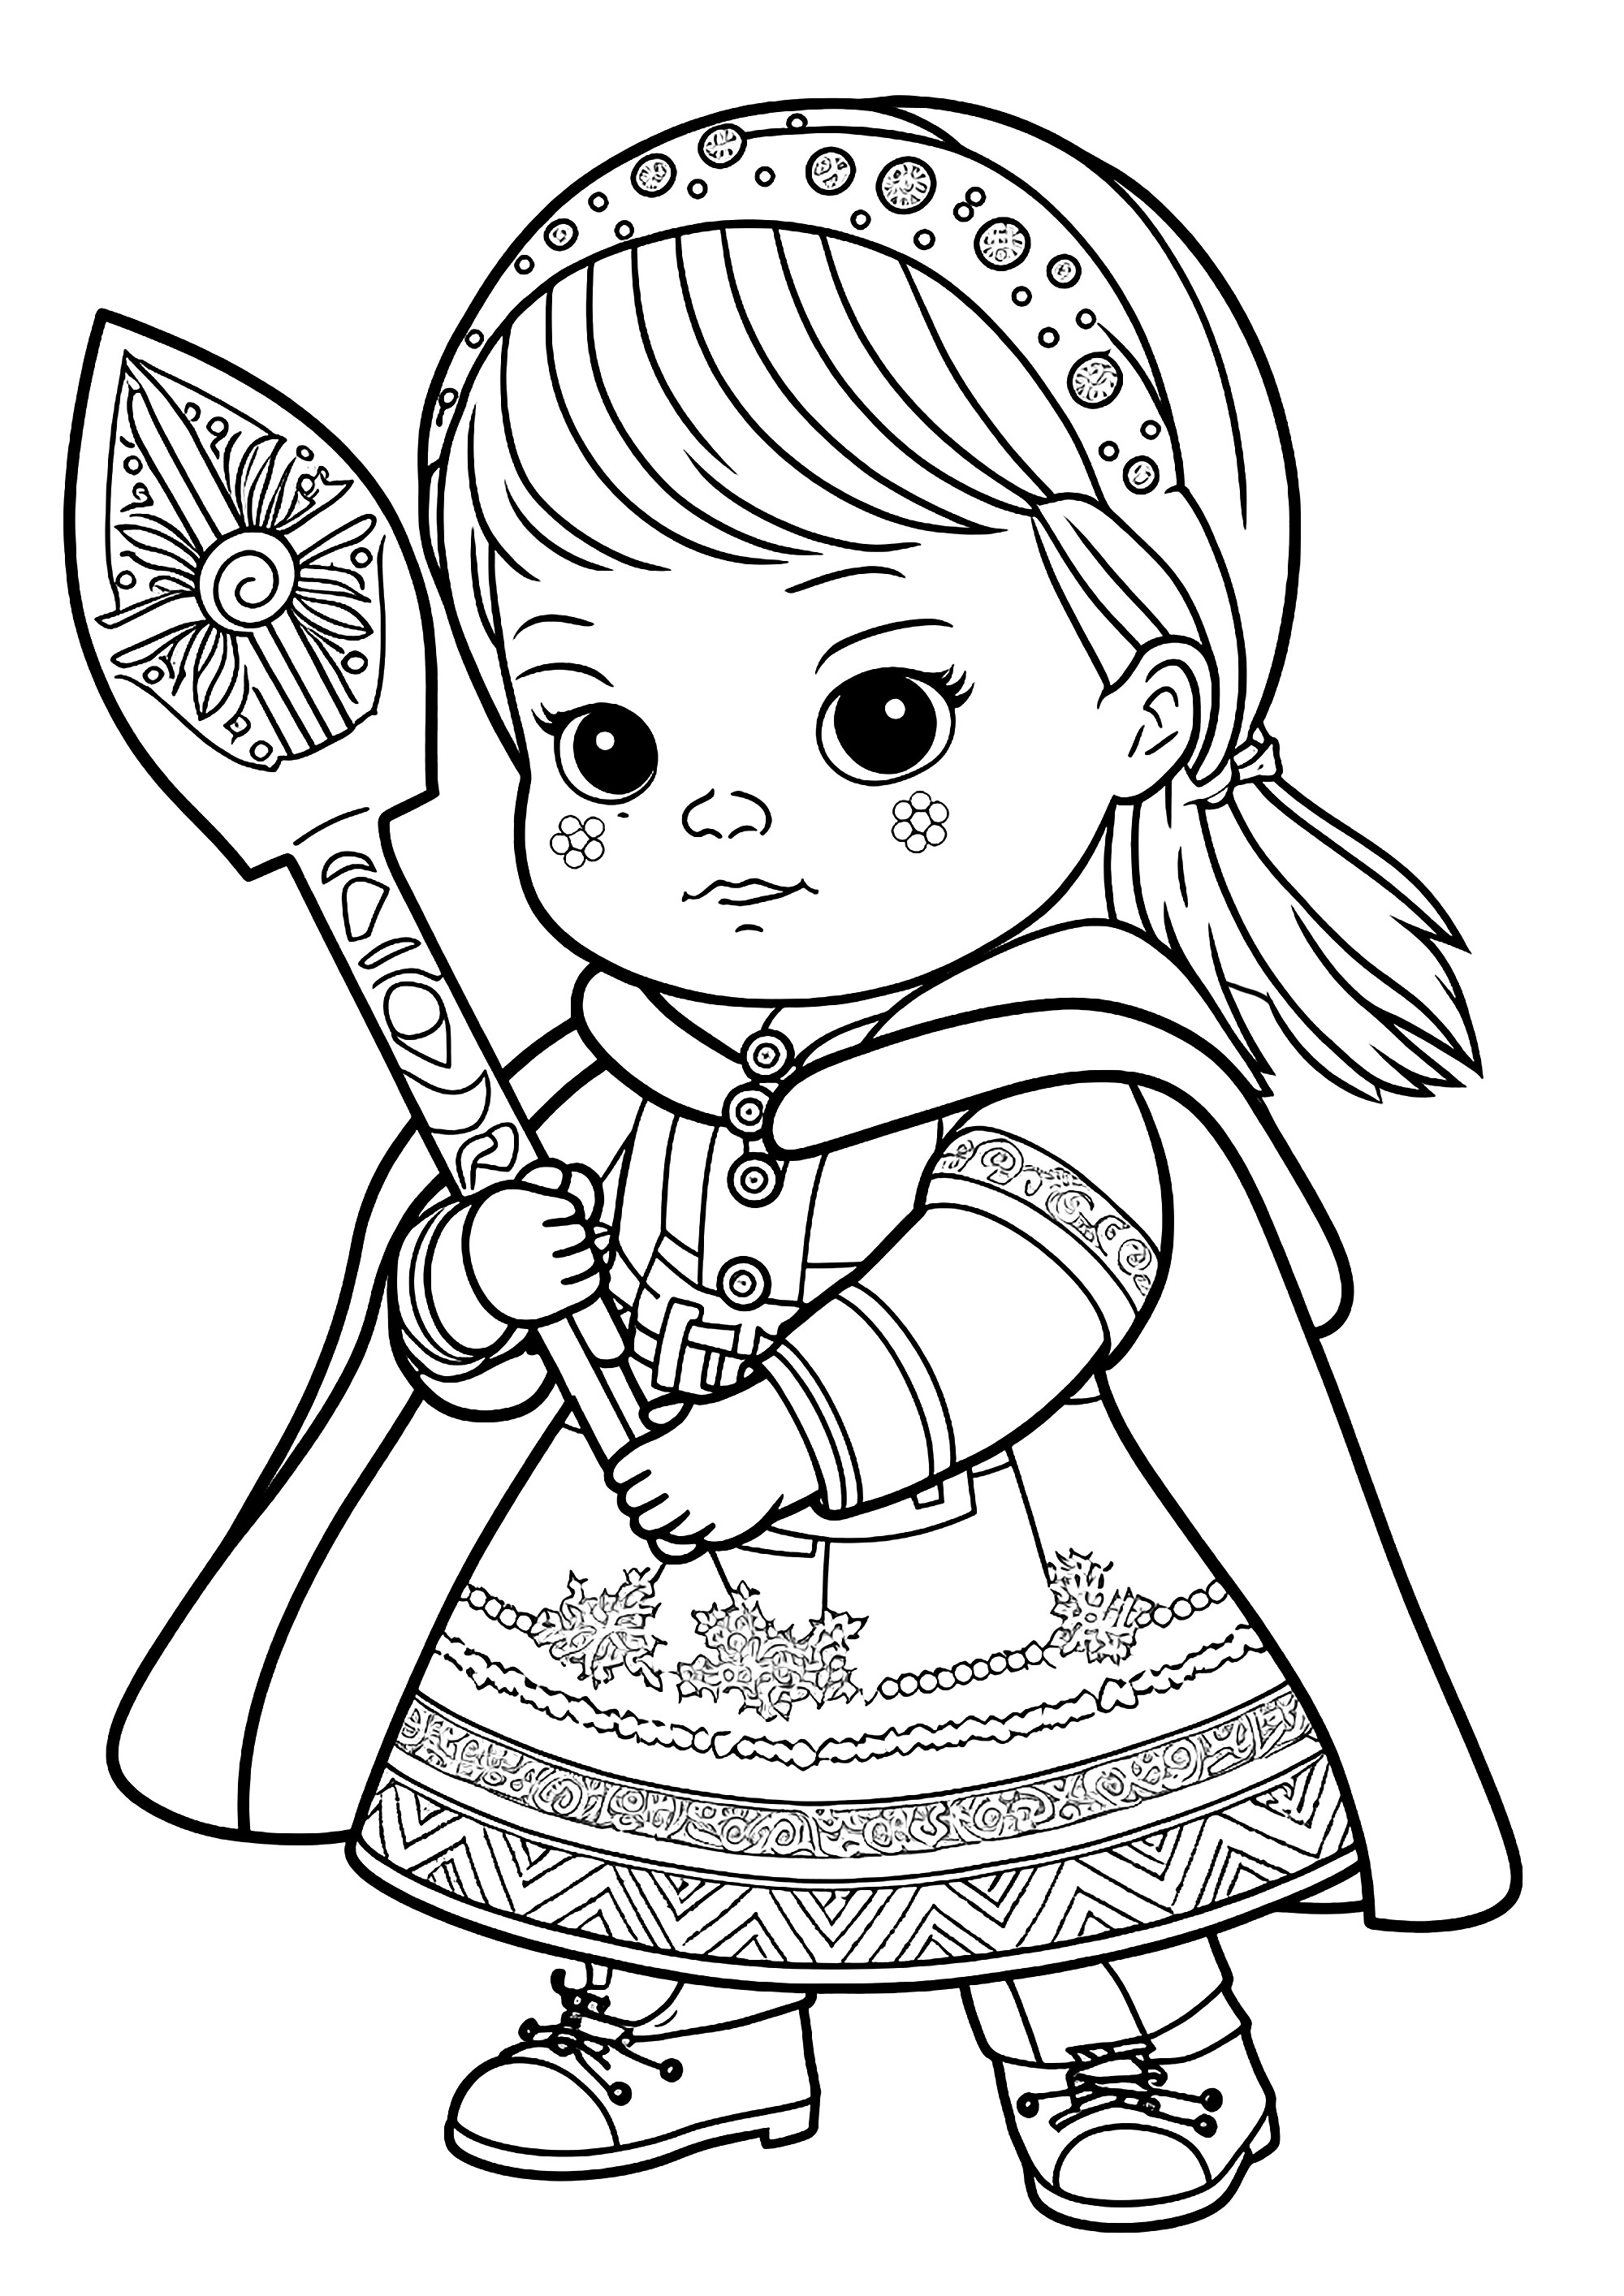 A little Viking princess, who looks very brave with her nicely decorated scepter